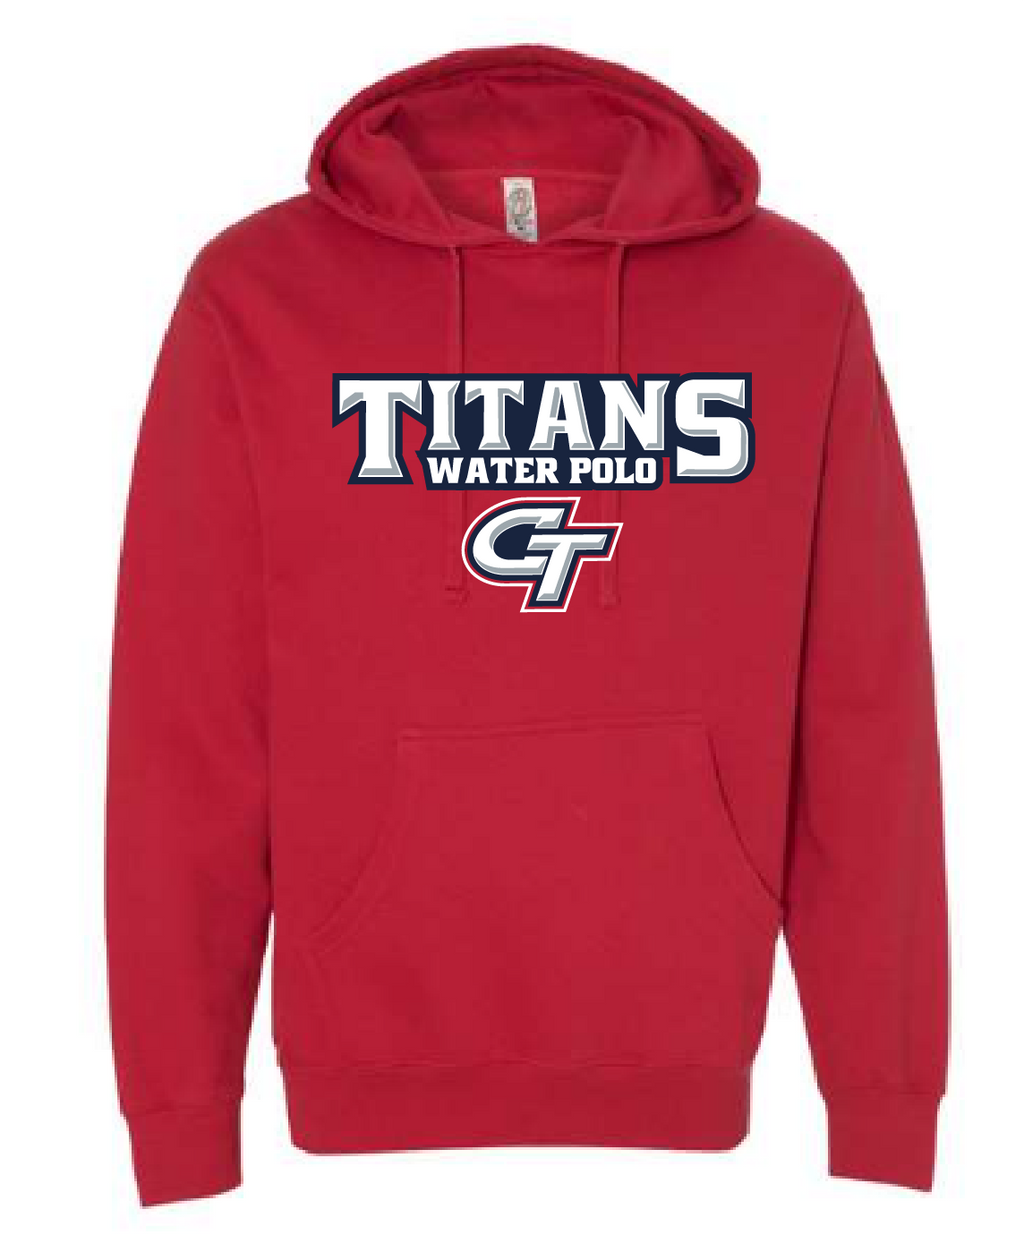 Colony High School Water Polo 2021 Custom Red Pullover Hooded Sweatshirt